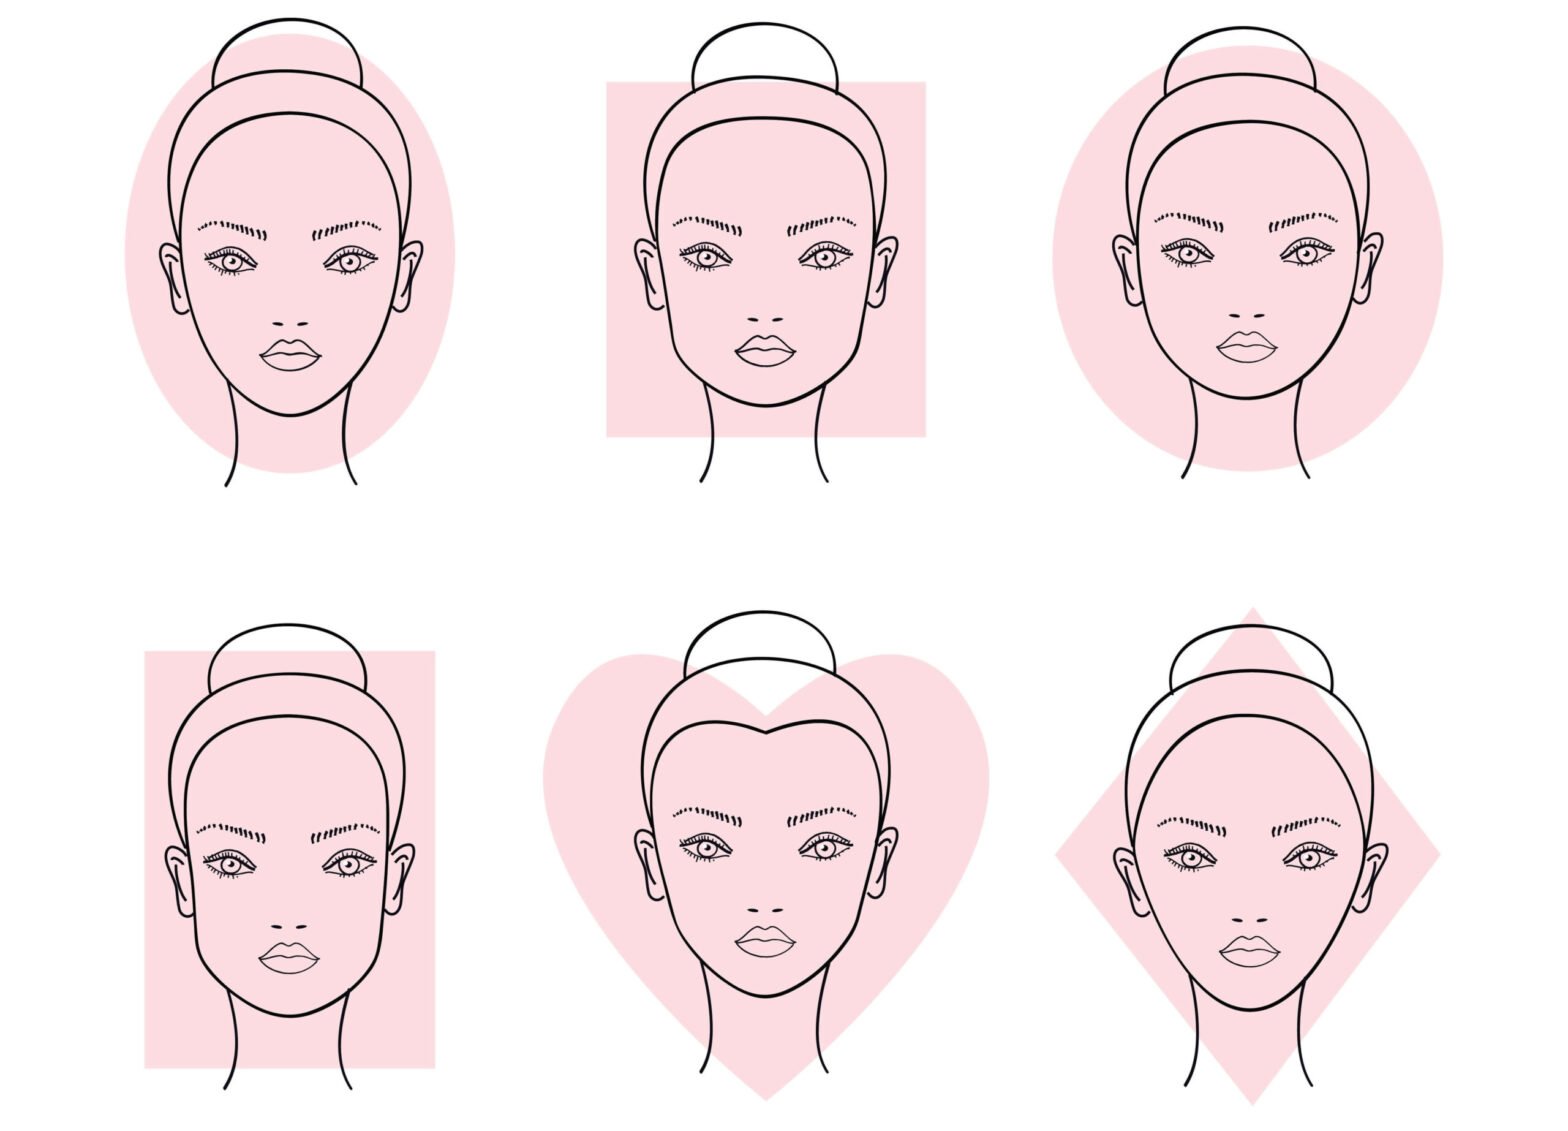 How to Choose a Hairstyle for your Face Shape